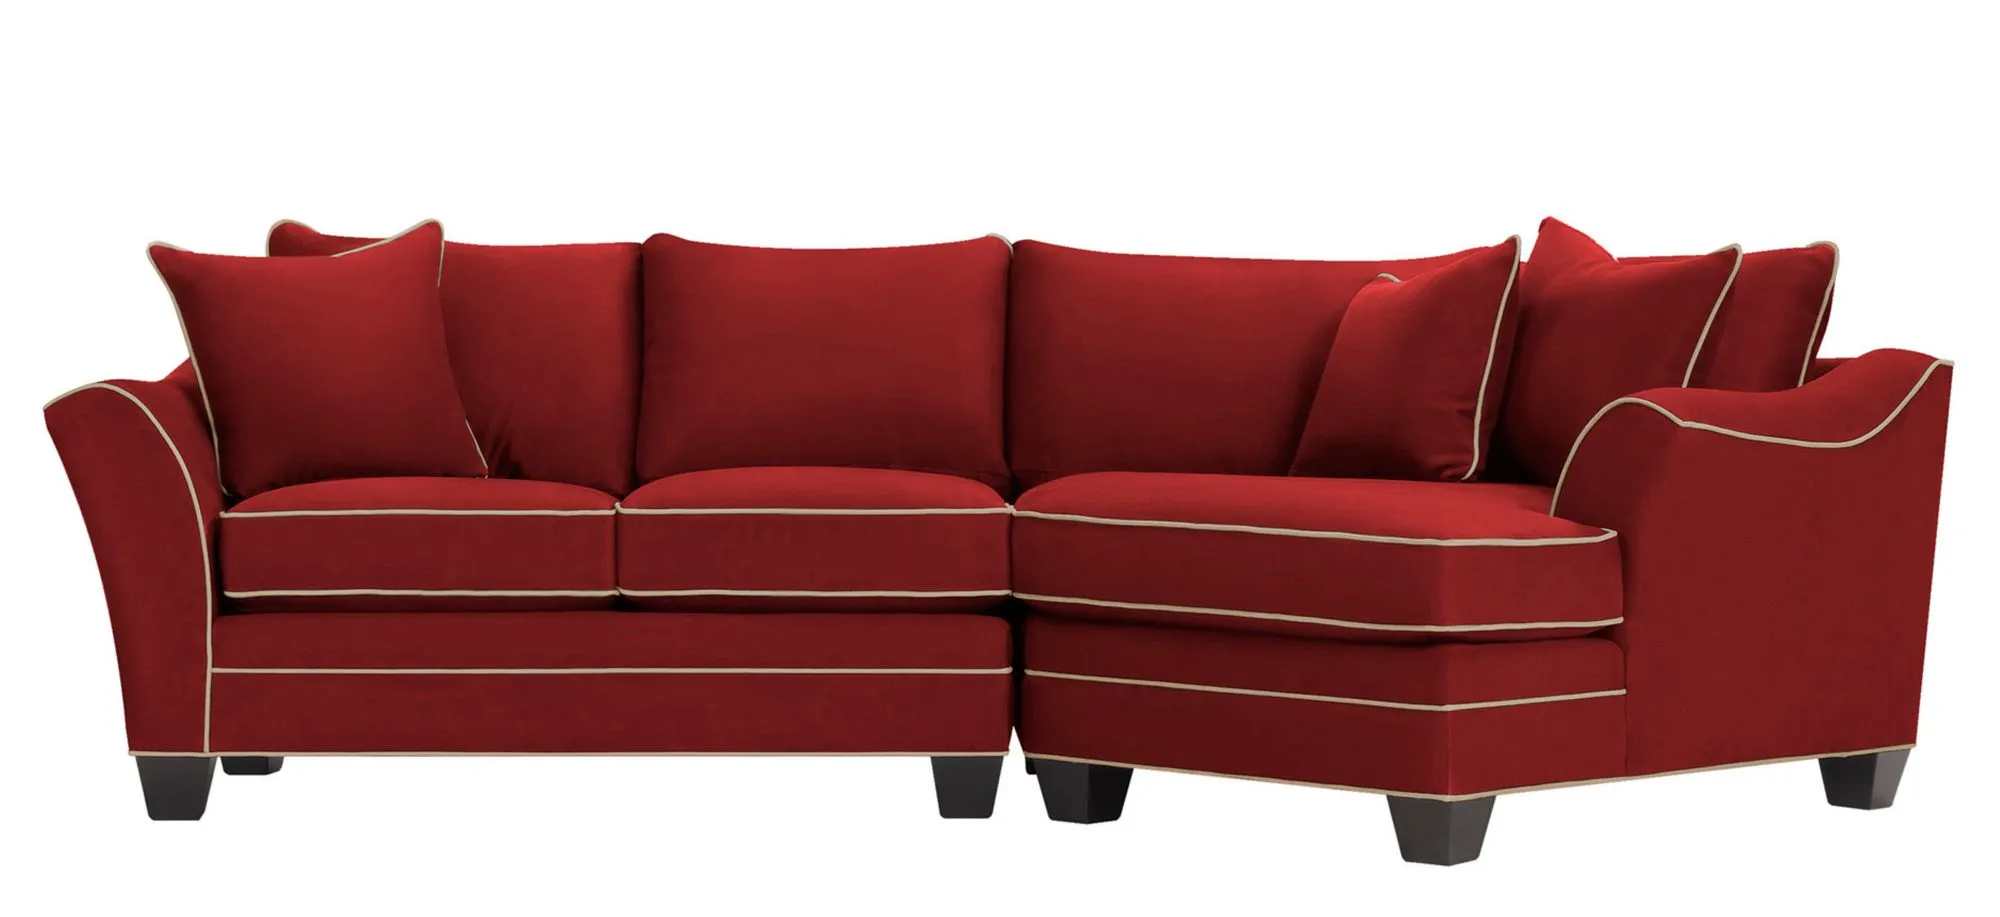 Foresthill 2-pc. Right Hand Cuddler Sectional Sofa in Suede So Soft Cardinal/Mineral by H.M. Richards